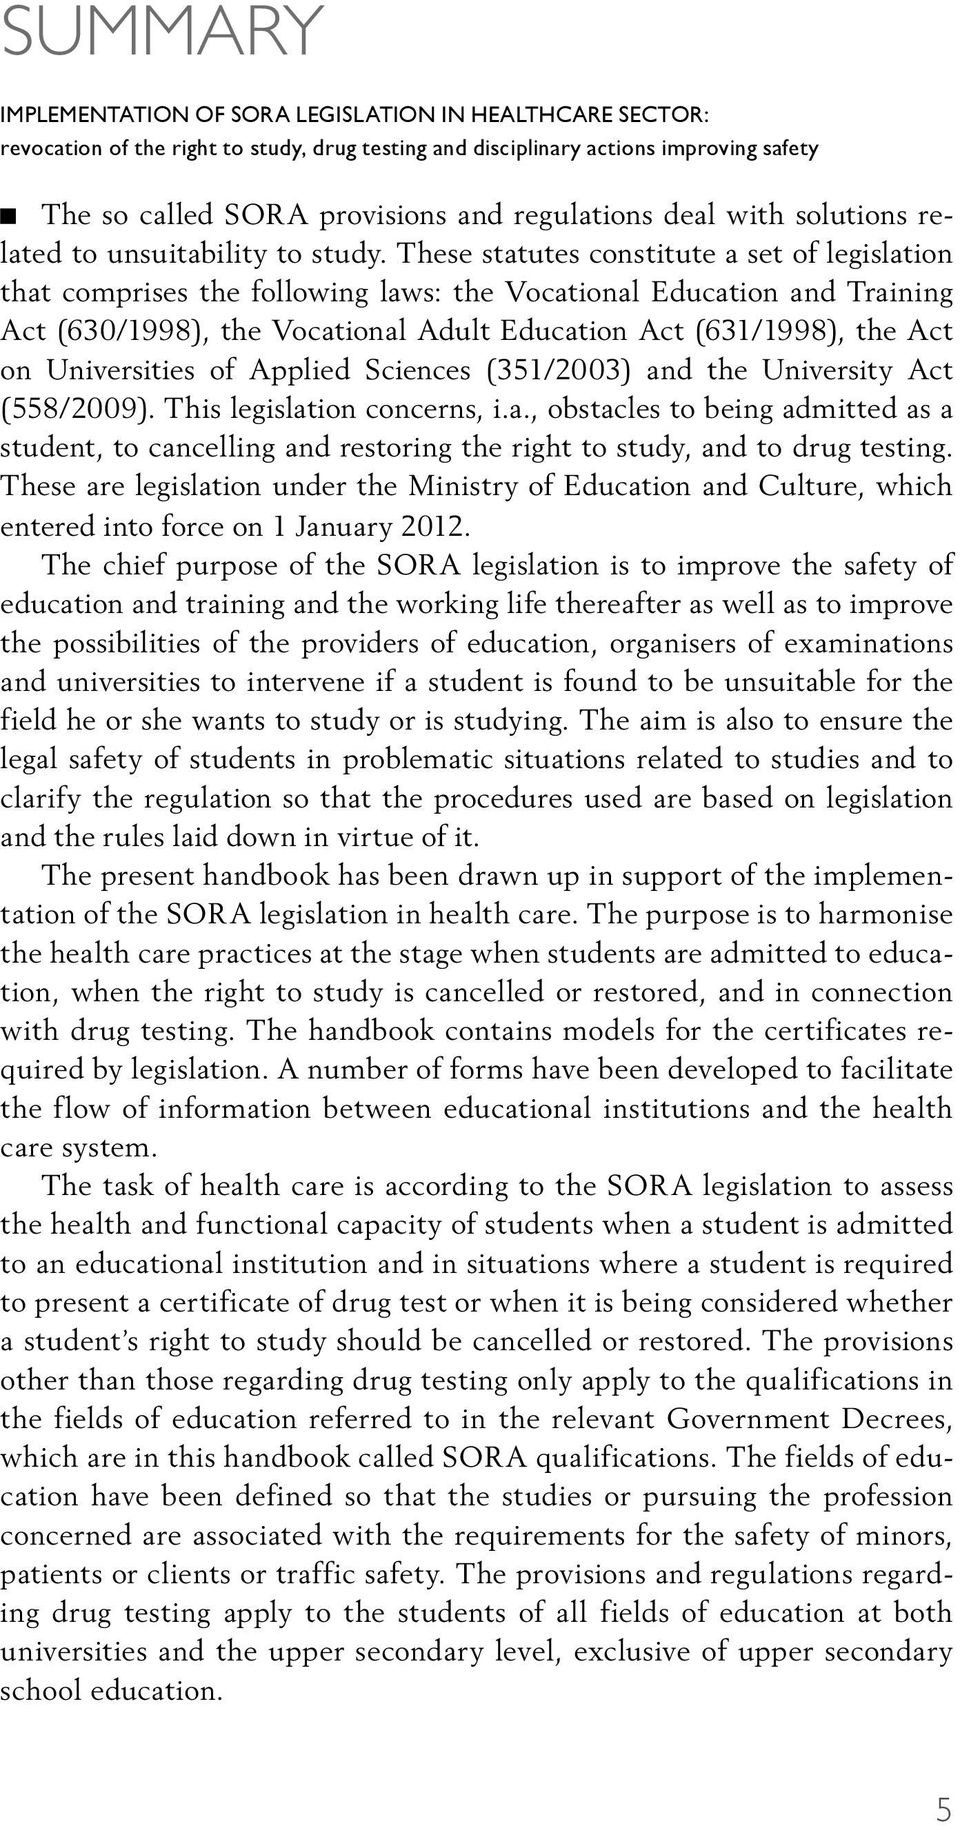 These statutes constitute a set of legislation that comprises the following laws: the Vocational Education and Training Act (630/1998), the Vocational Adult Education Act (631/1998), the Act on